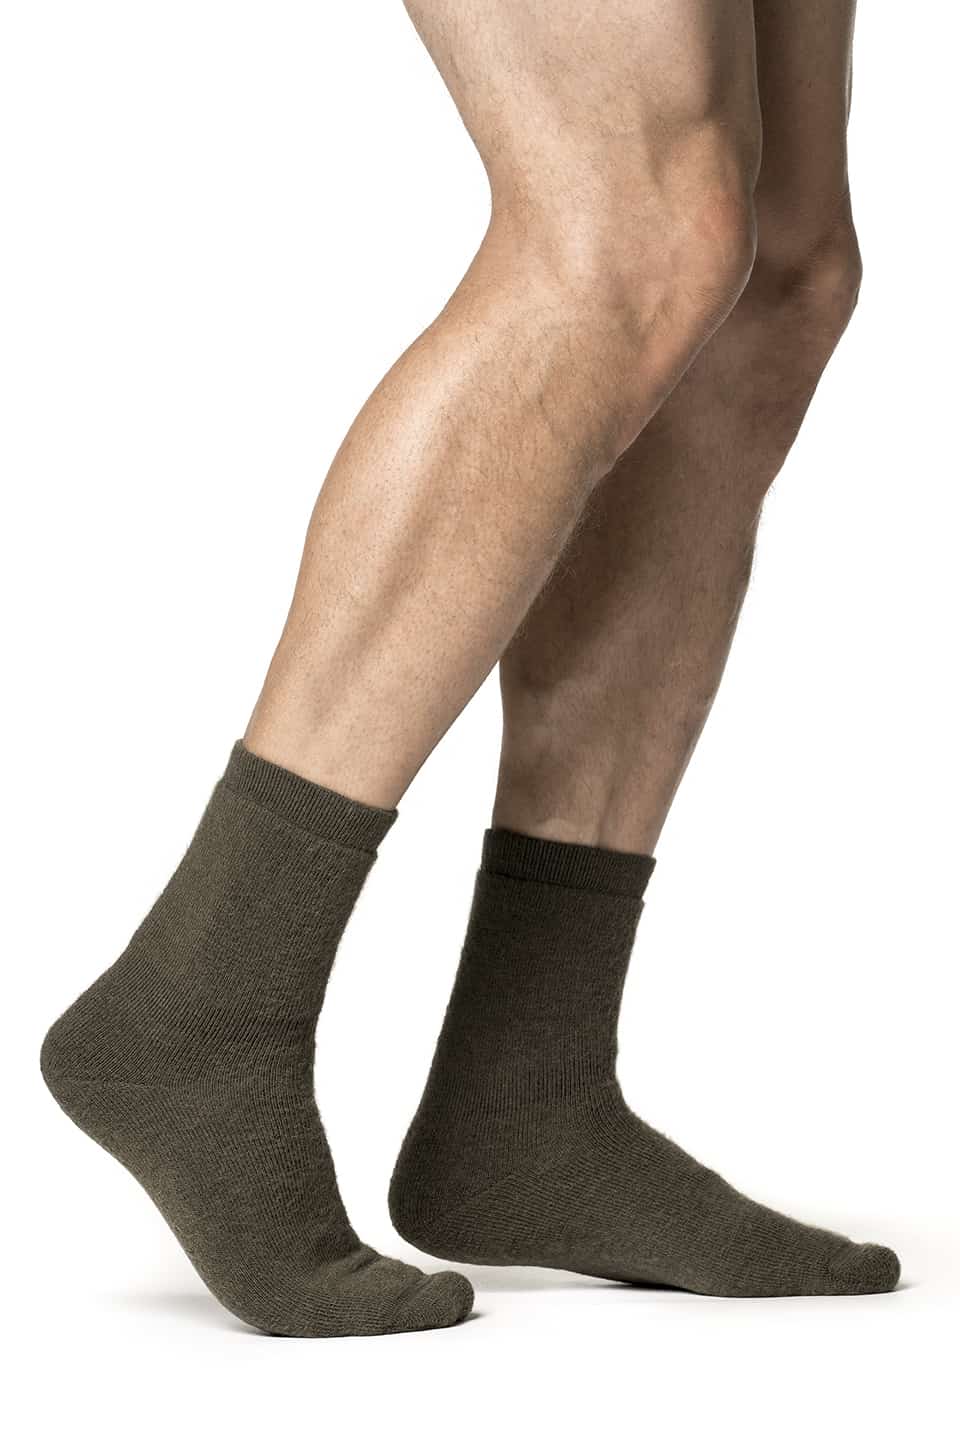 photo of Woolpower socks 400 in pine green colour